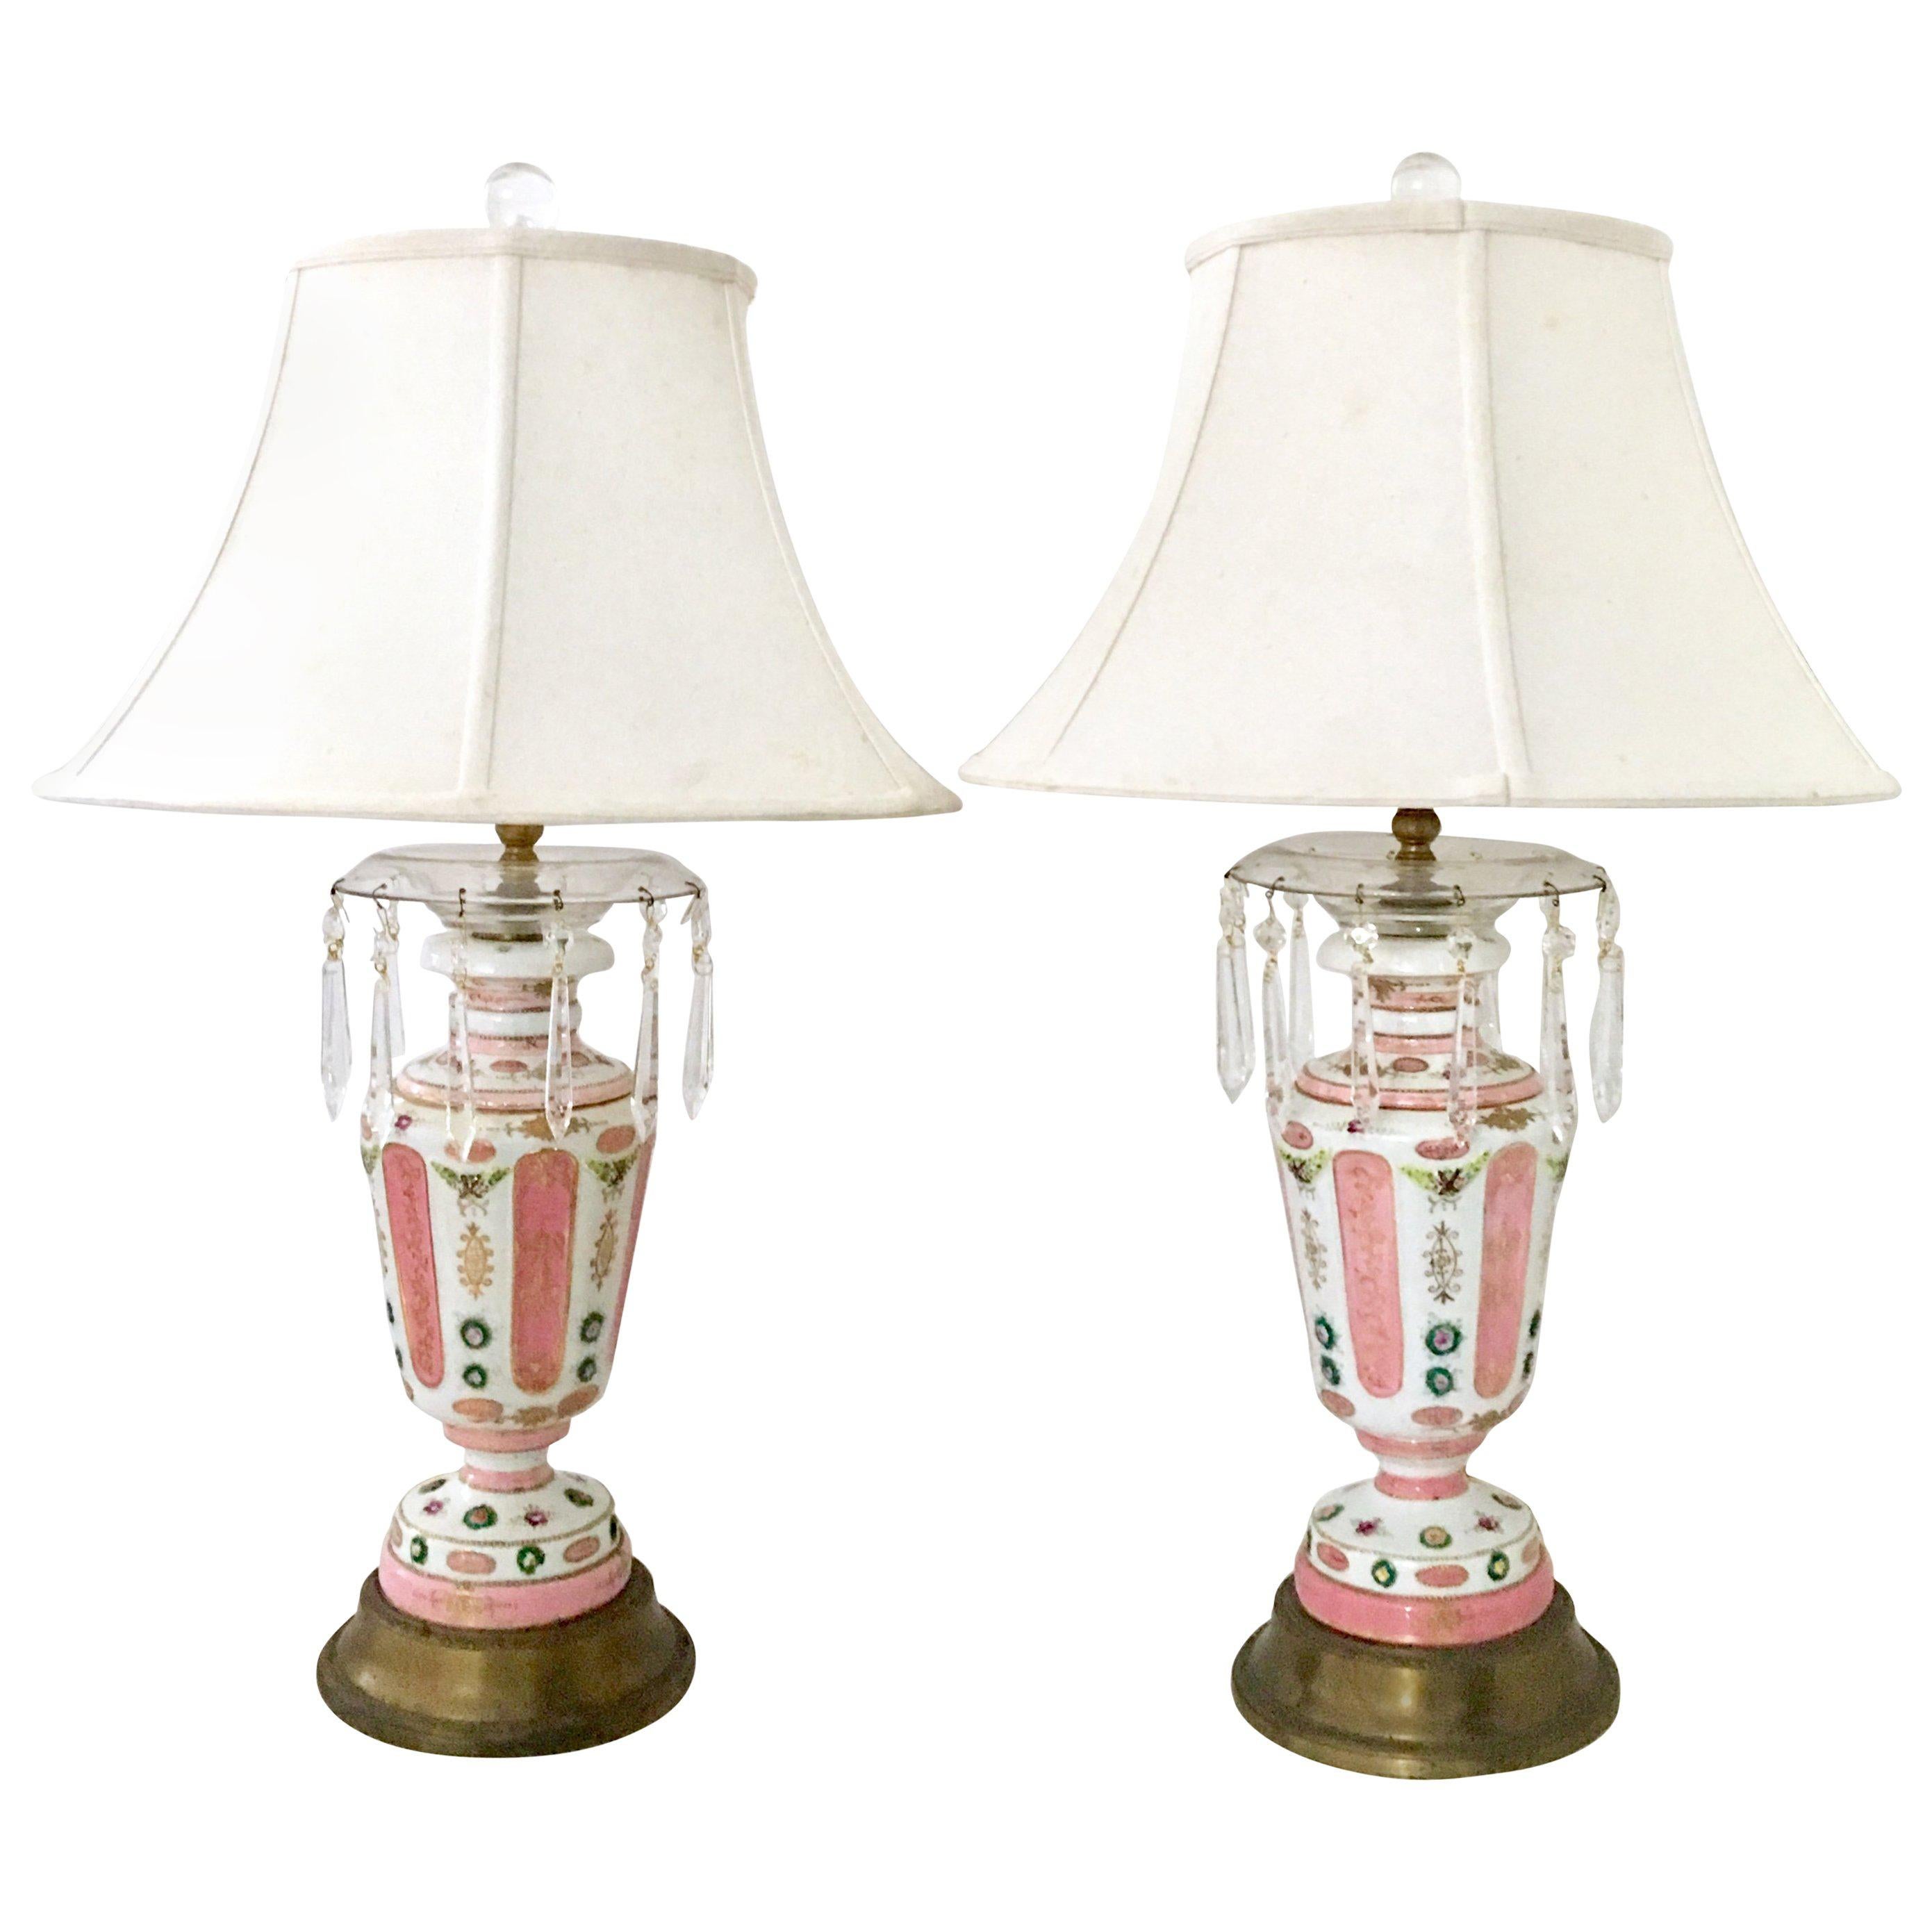 Antique Pair of French Hand Painted Gilt Porcelain and Crystal Prism Lamps For Sale